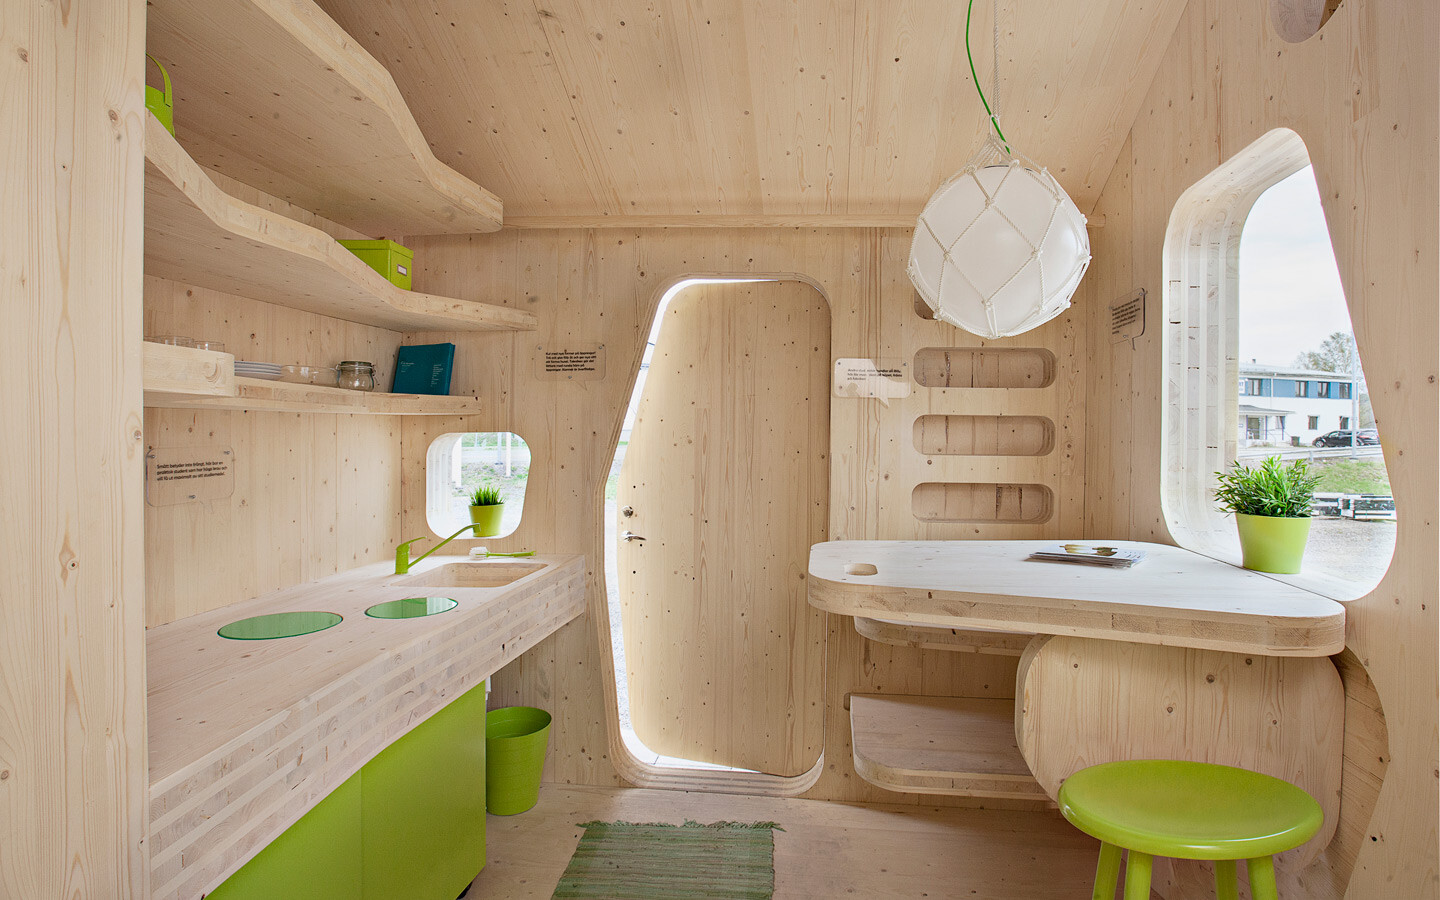 Student Unit - mini compact house for students by Tengbom Architects (2)